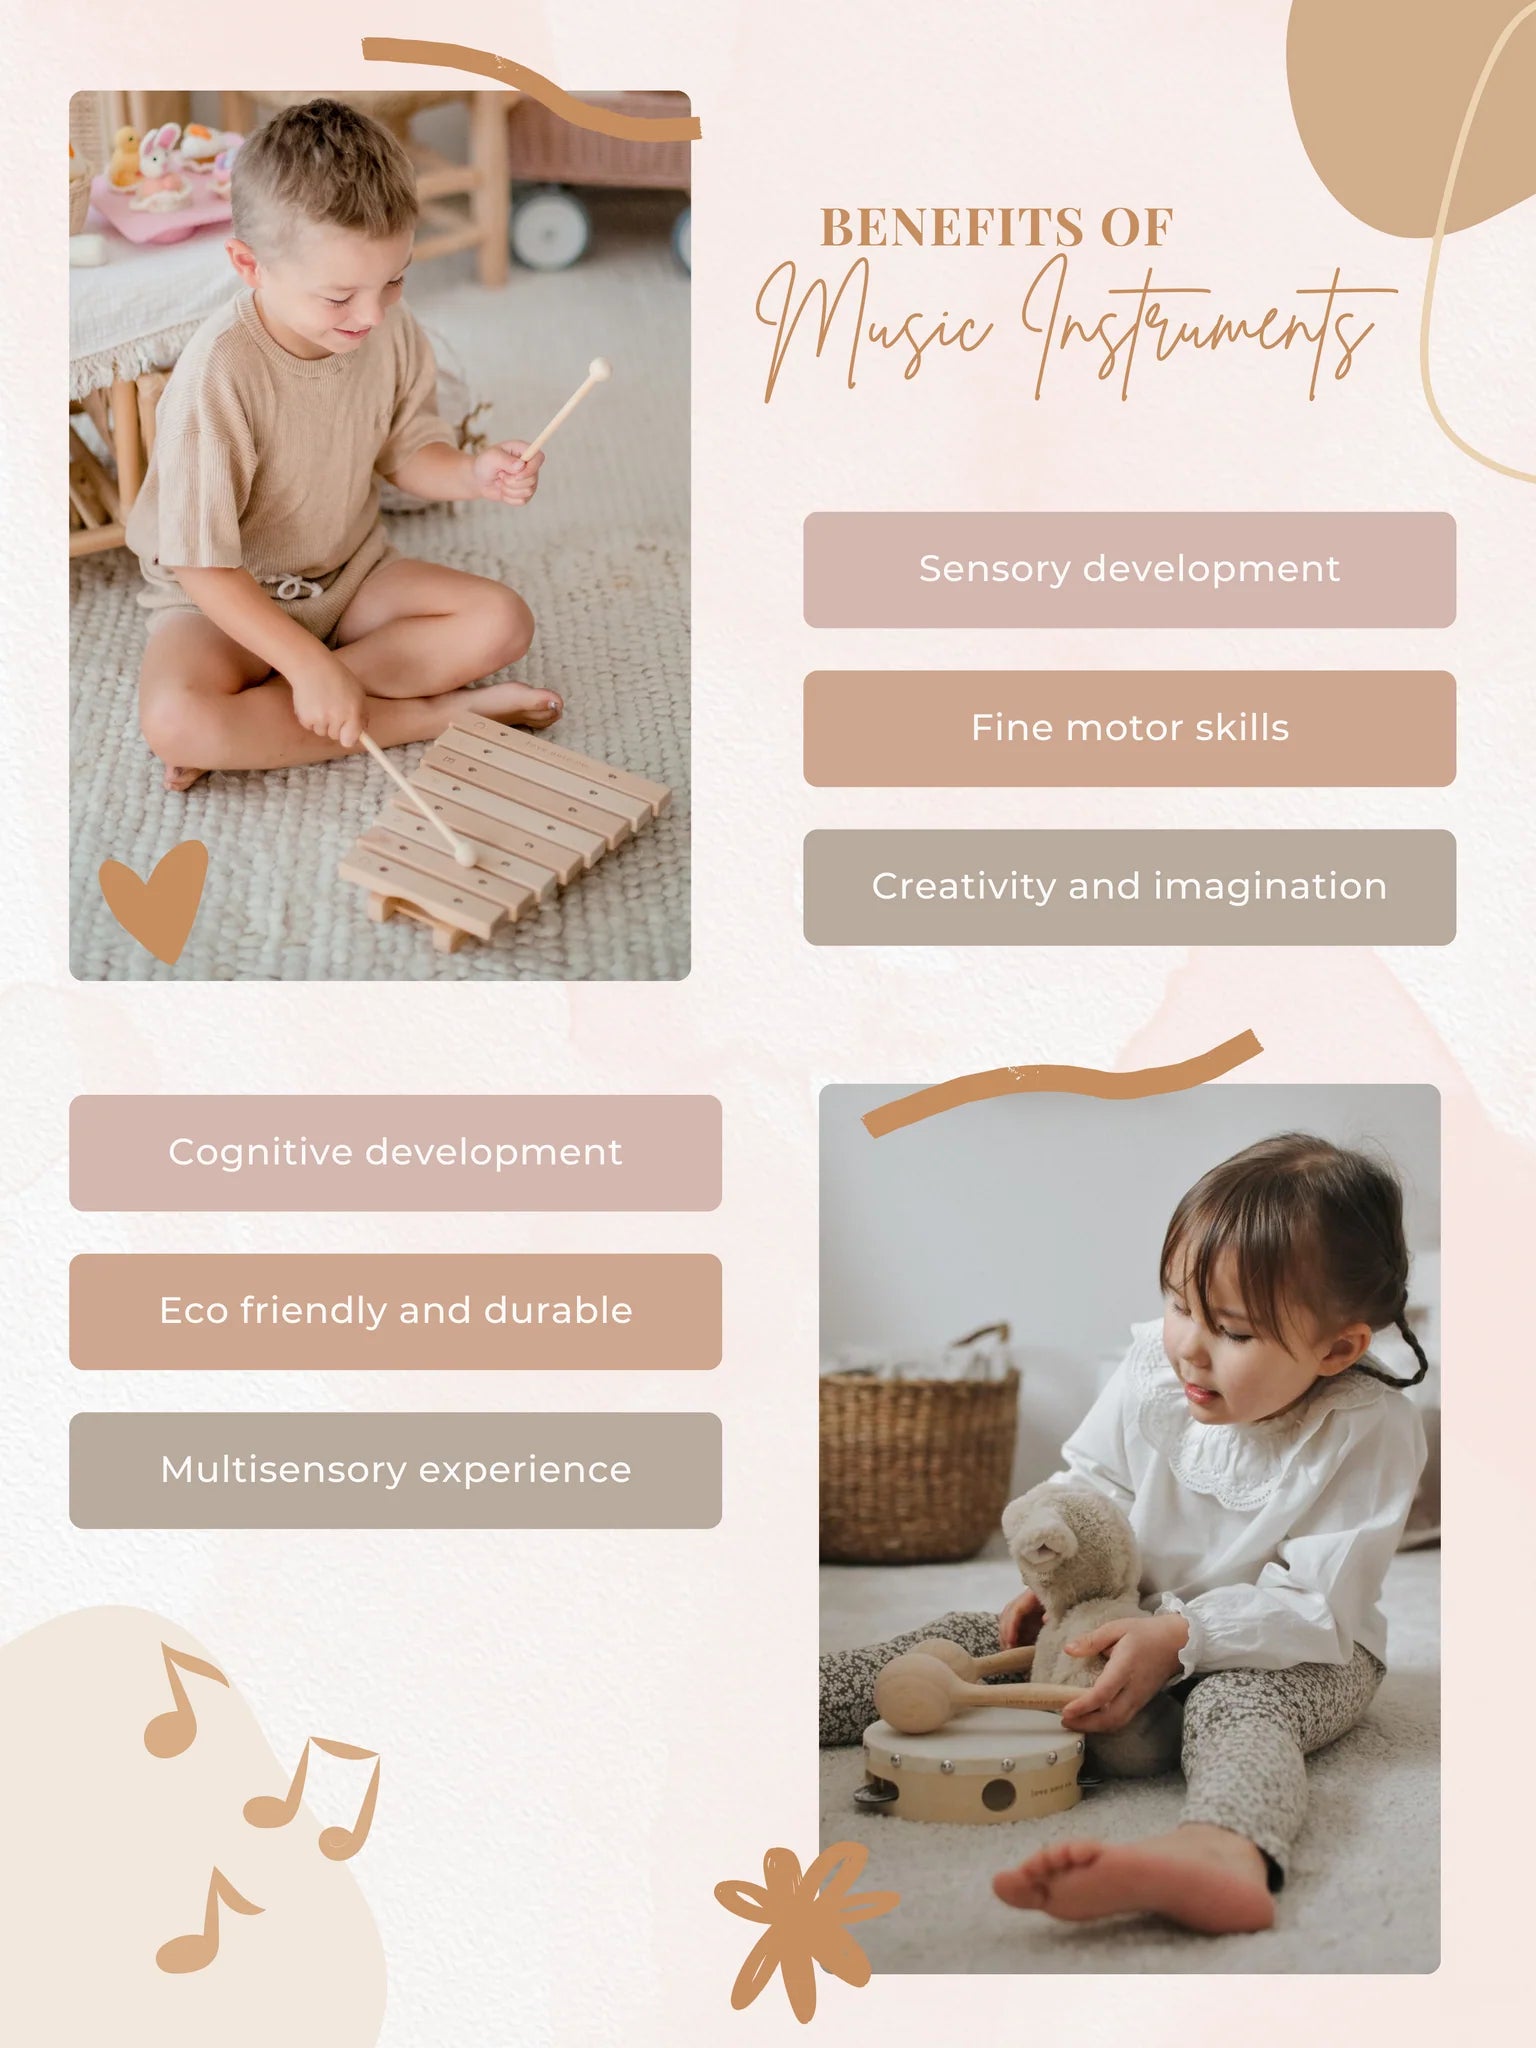 Maracas by Love Note Co - Musical instruments for Kids